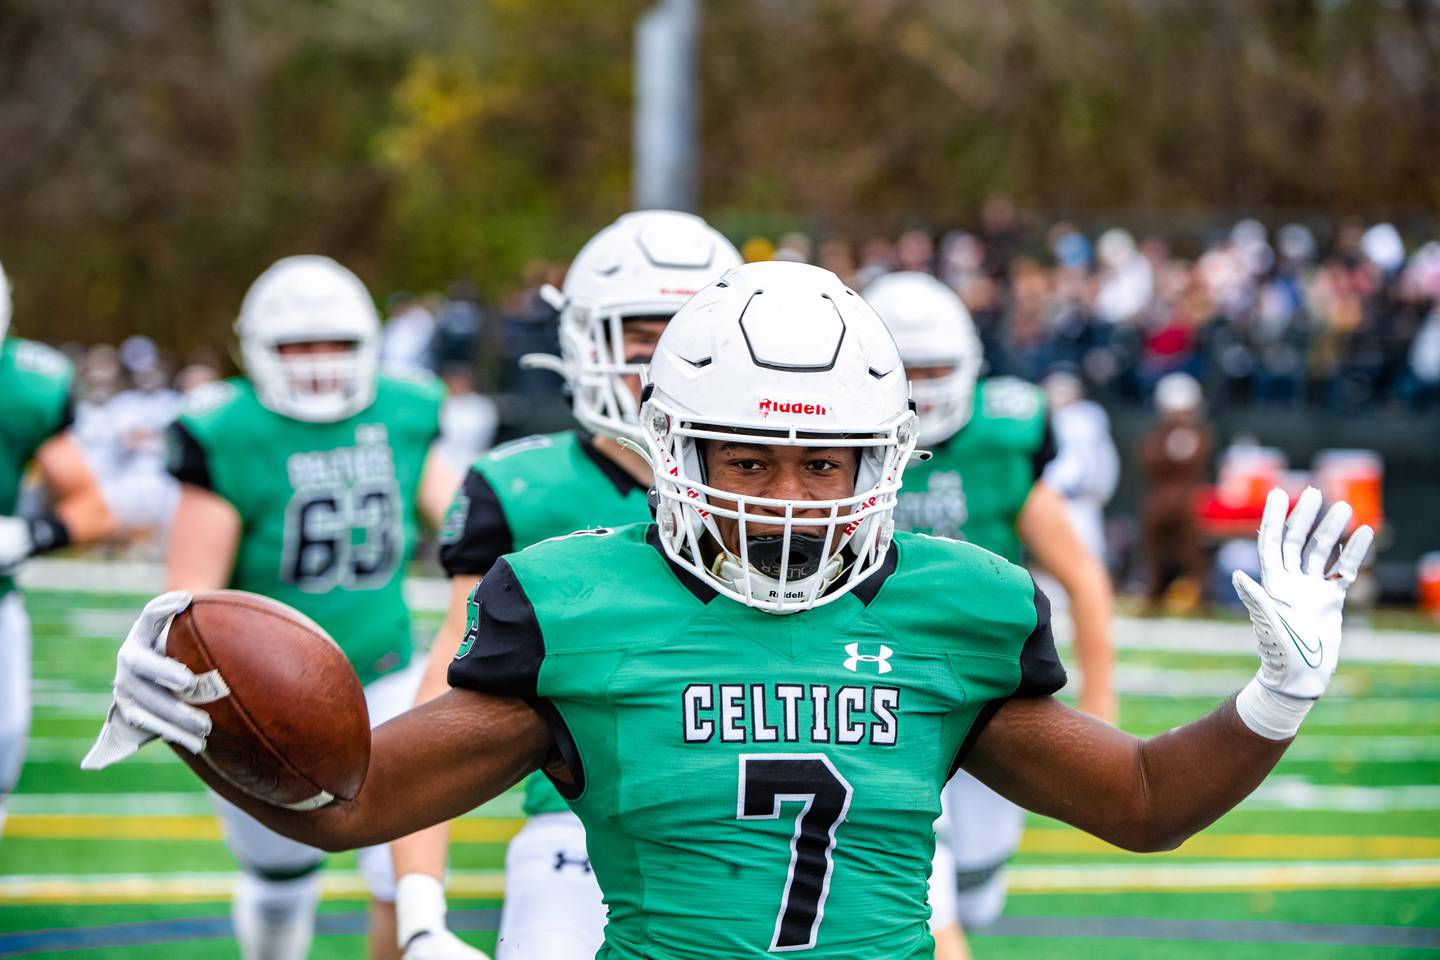 Providence Catholics Jamari Tribett runs in a touchdown during the 2nd round IHSA playoff game against Joliet Catholic Academy Saturday Nov. 5, 2022 at Providence Catholic High School in New Lenox